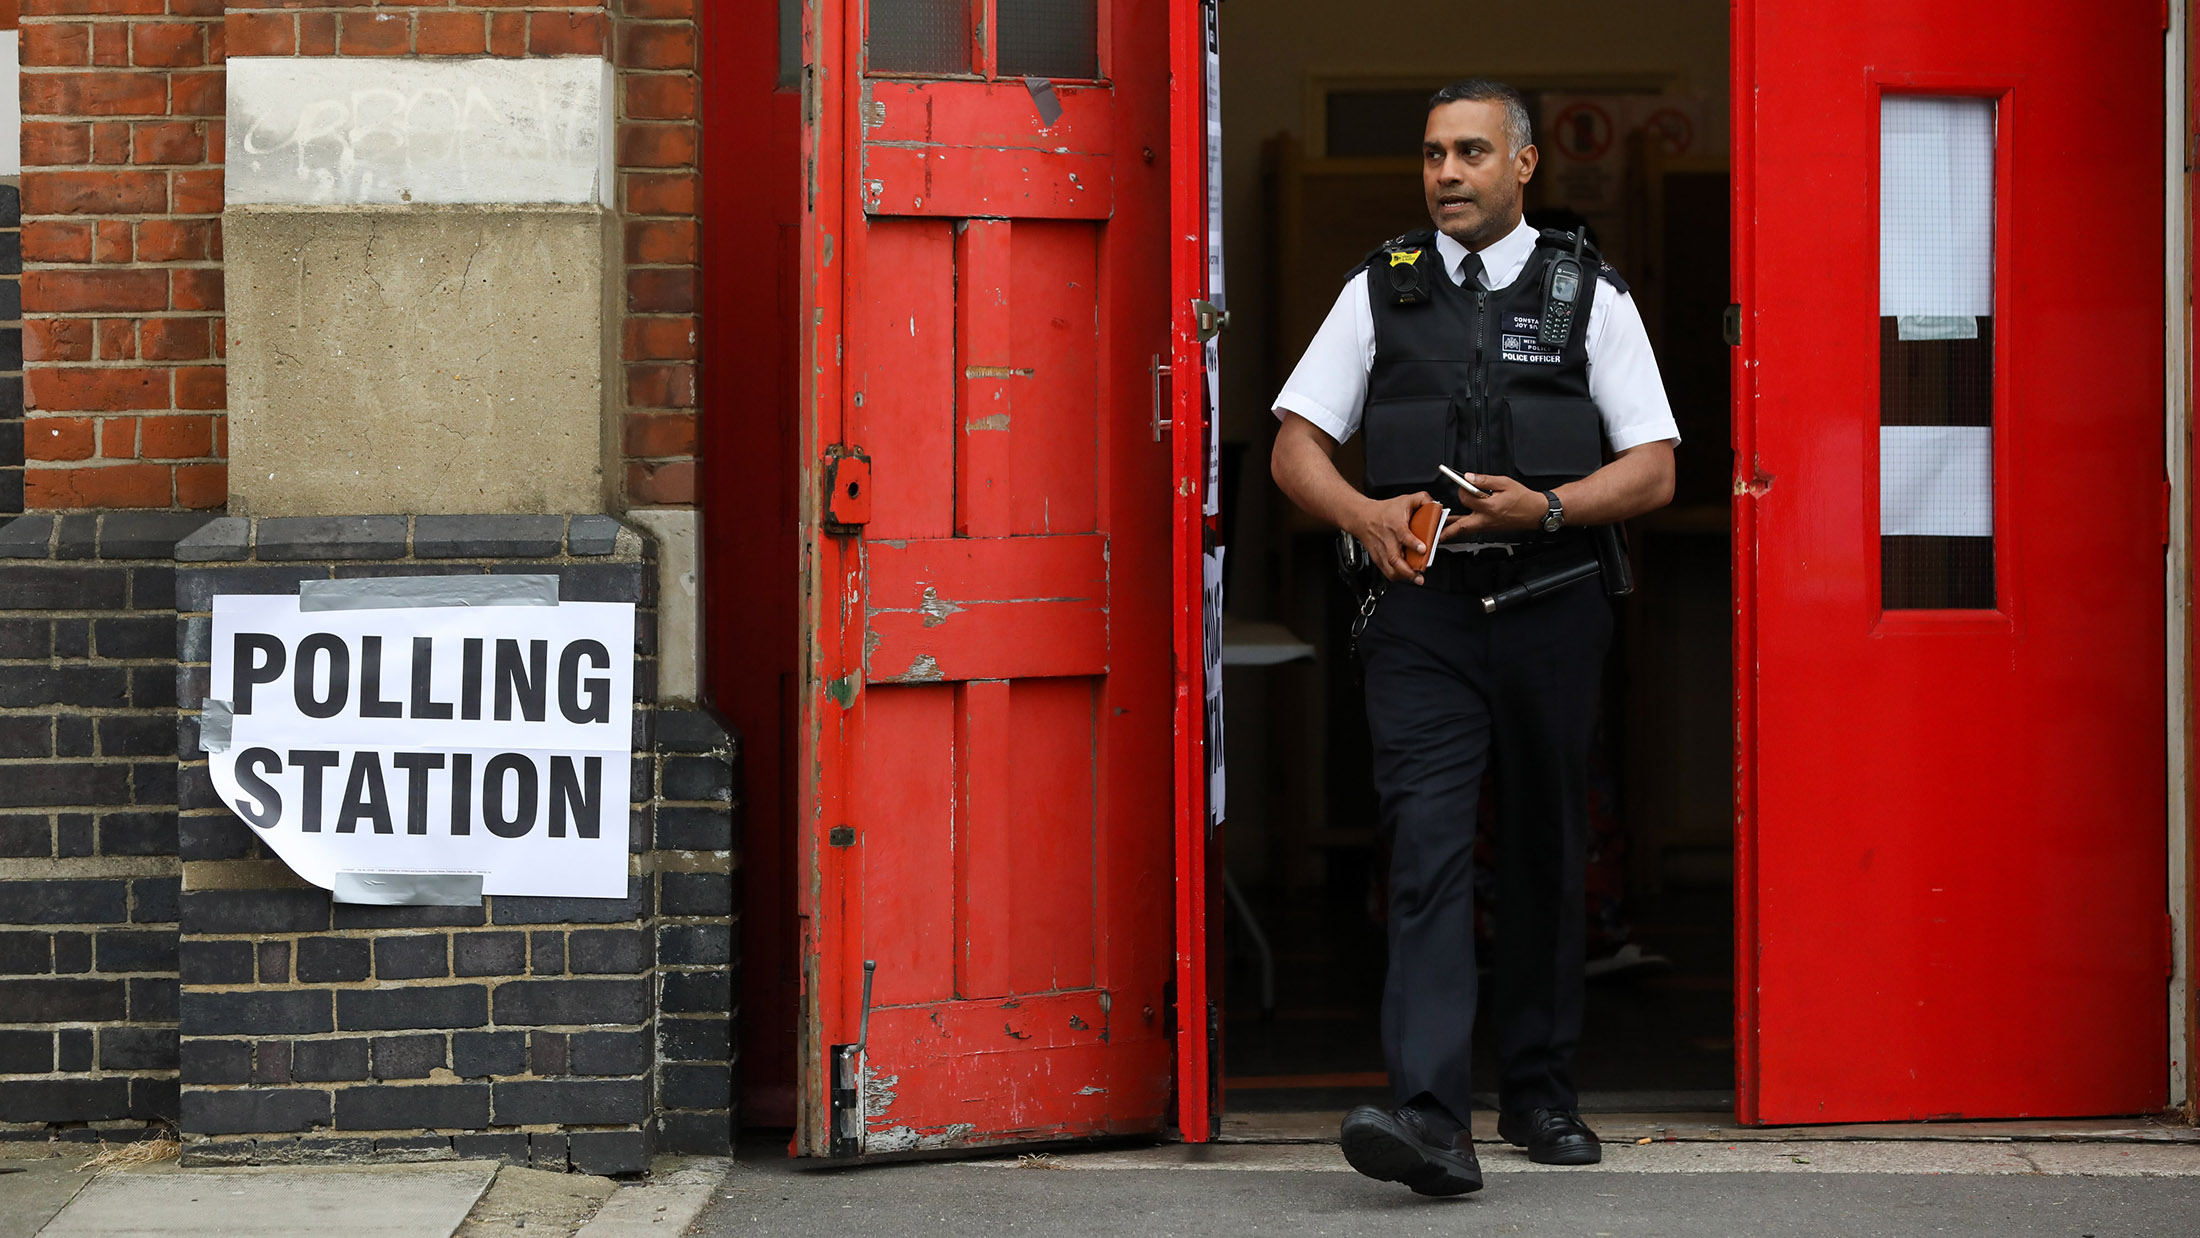 A police officer leave the a polling station for the general election at The Old Fire Station in the Stoke Newington district of London, U.K., on Thursday, June 8, 2017. Britons vote today after an election dominated by Brexit, austerity and in the closing phases, security.
